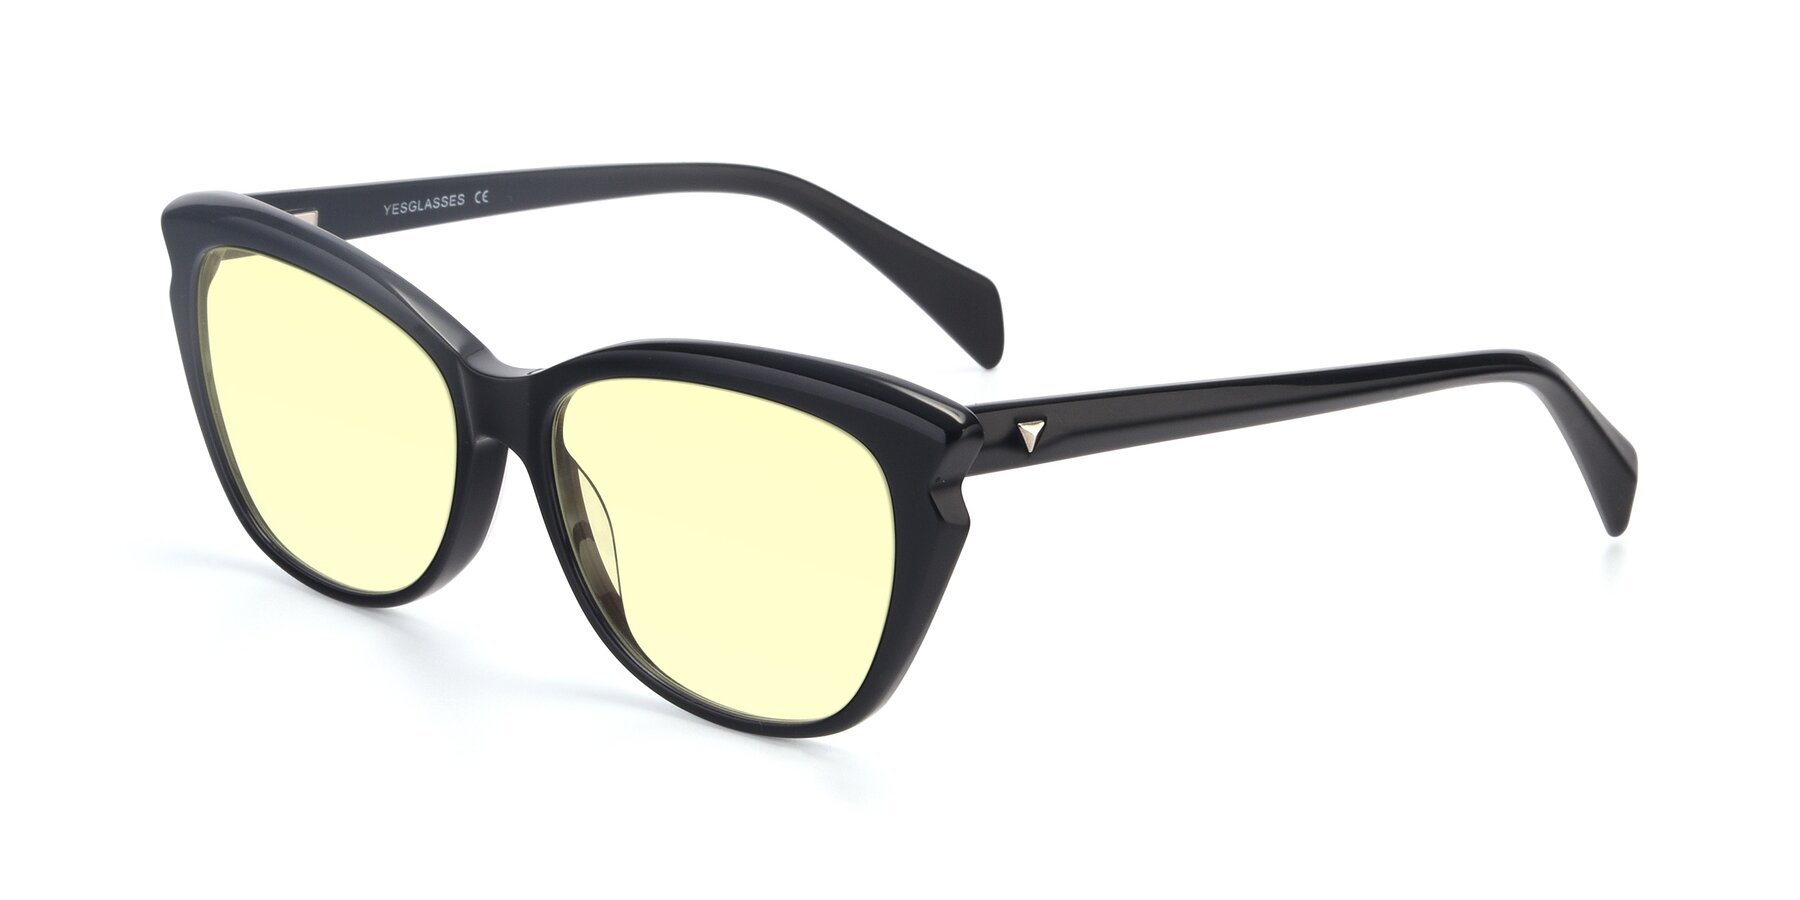 Angle of 17629 in Black with Light Yellow Tinted Lenses